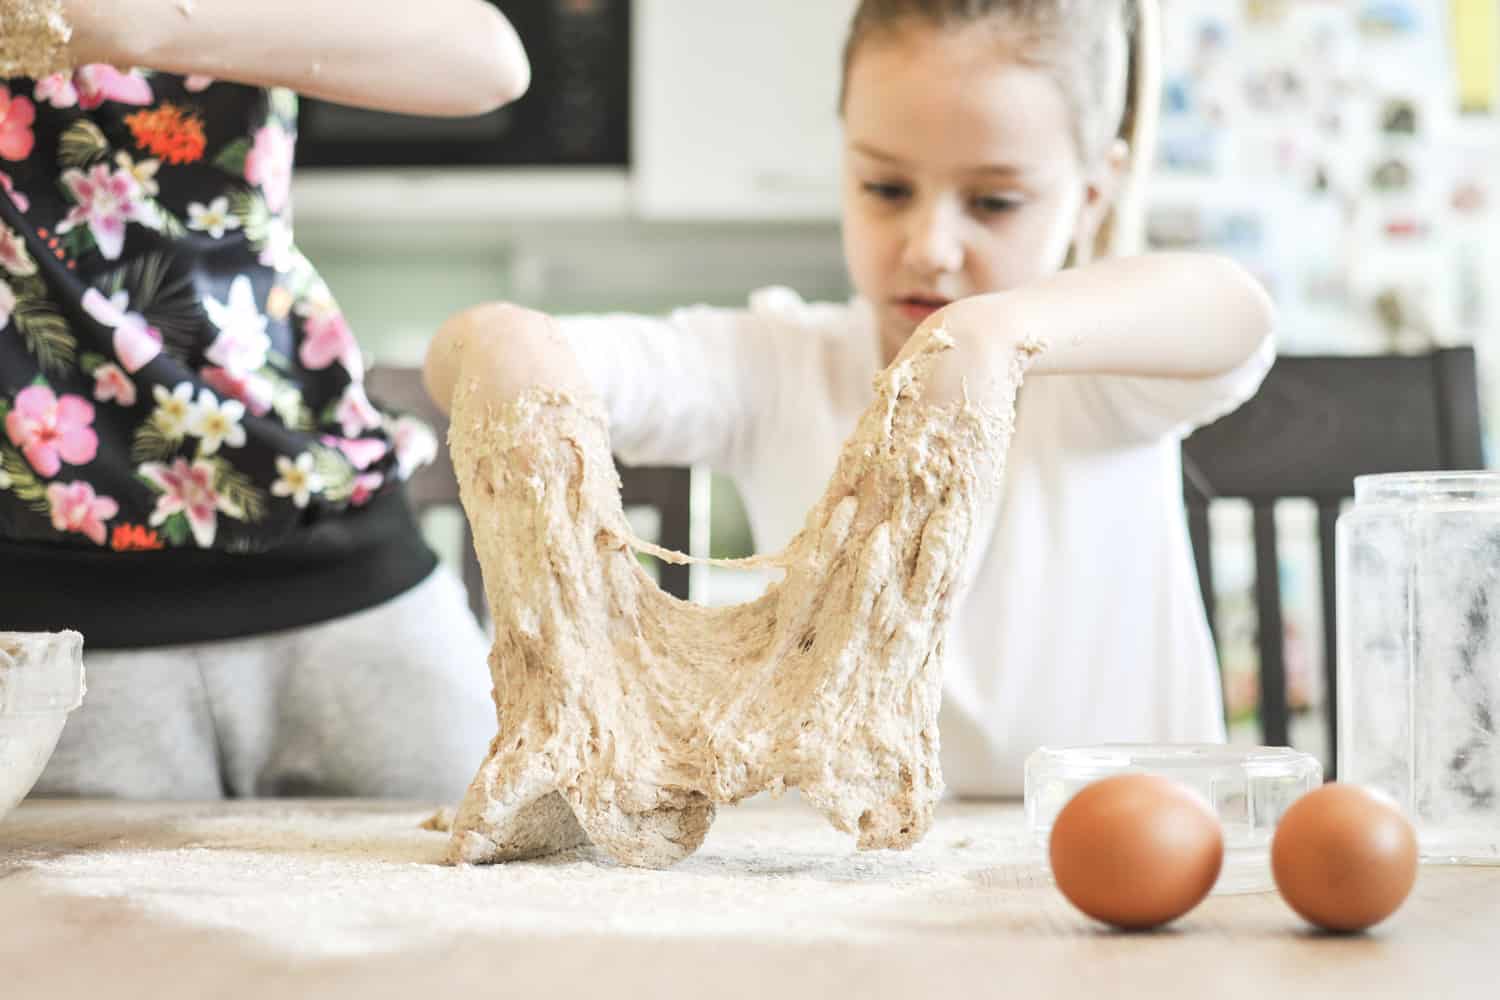 Cute little girls having fun while making a dough for a bread or pizza in a domestic kitchen.